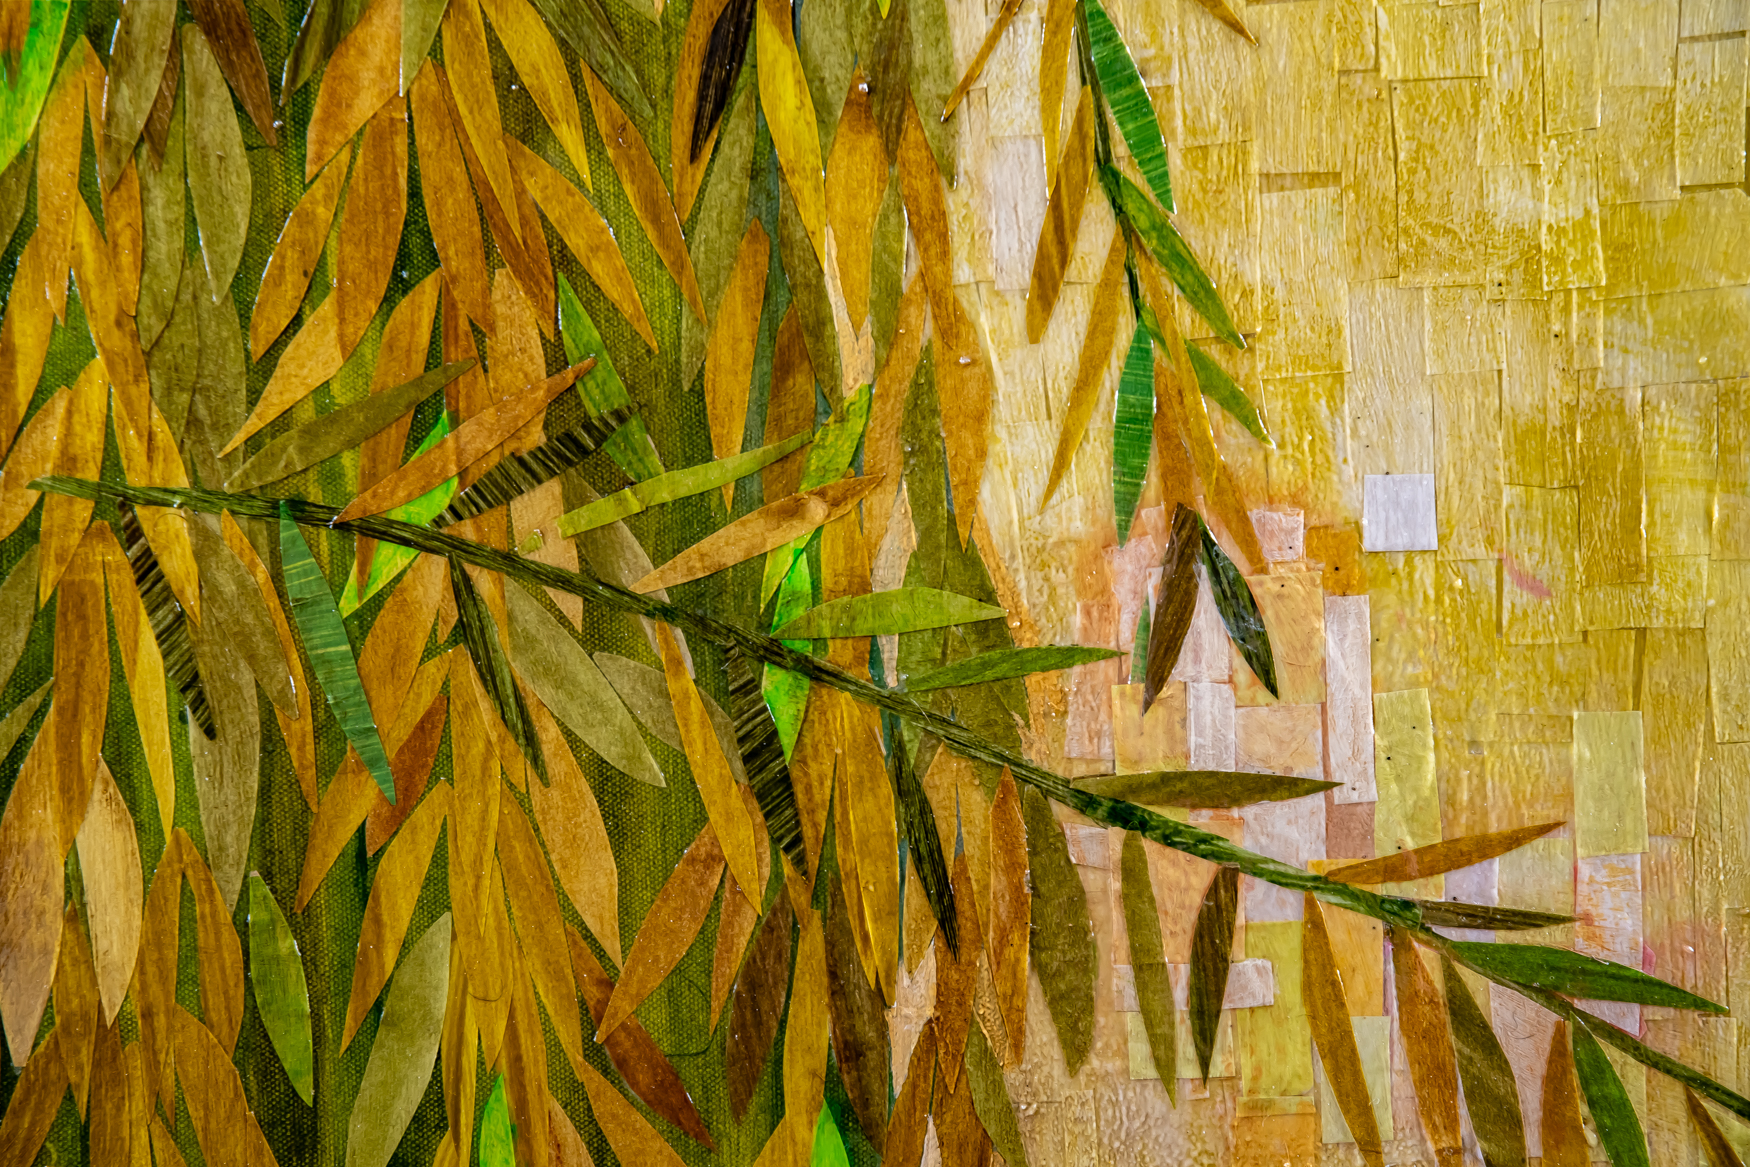 A close up view of a section of Wading Through The Willows is a 36" x 36" mixed media piece of  painted paper collage on canvas. It pictures a young woman with dark hair, wearing a yellow dress, surrounded by a drape of willow branches against a blue sky, surrounded by a thick drape of golden yellow and green willow branches against a blue sky.